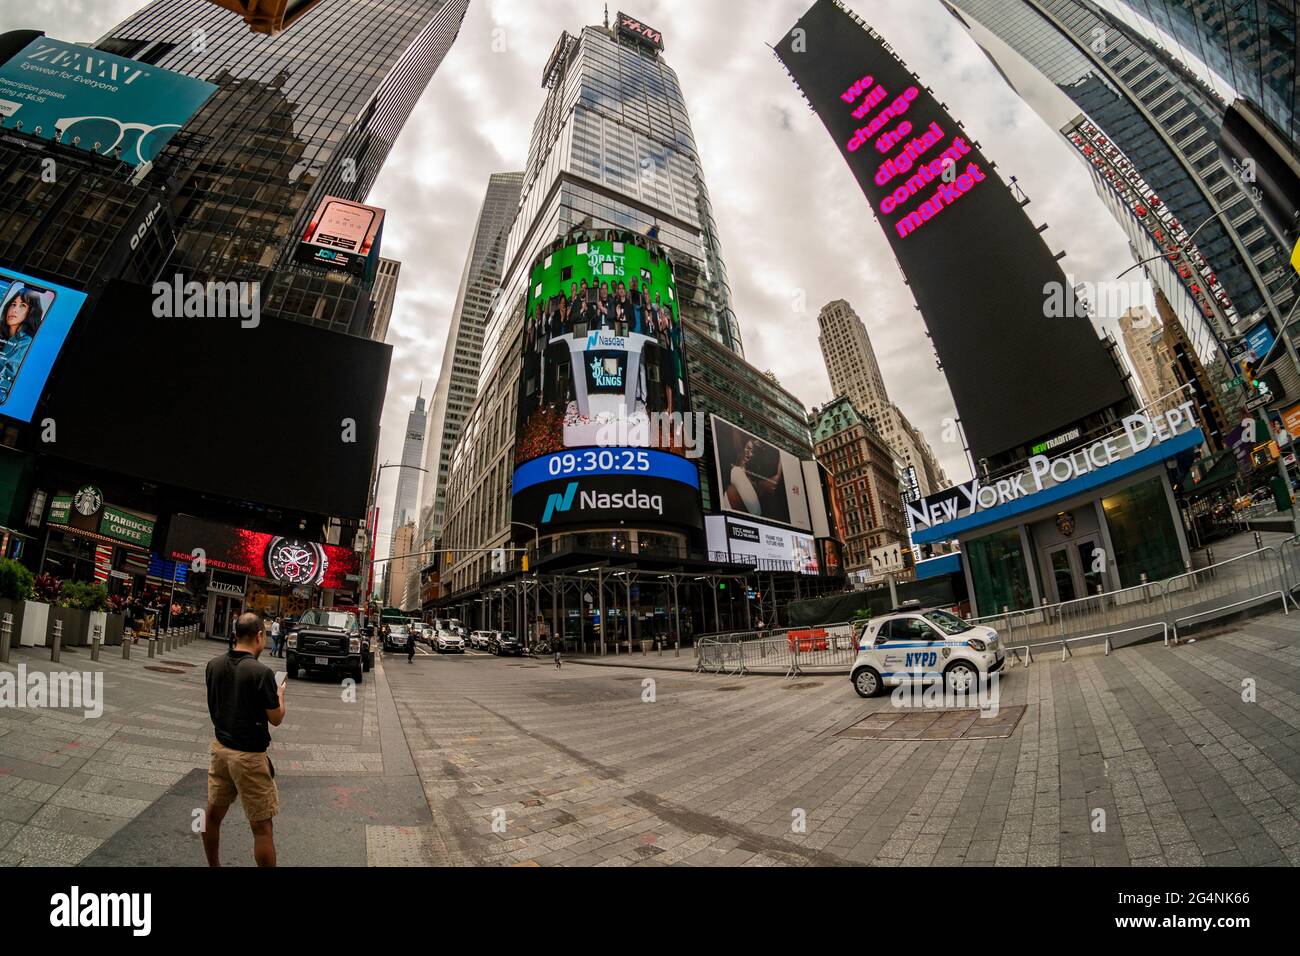 The Nasdaq stock exchange is decorated for a belated welcoming for DraftKings, in Times Square in New York on Frida June 11, 2021.  DraftKings went public in April 2020 combining with a SPAC.(© Richard B. Levine) Stock Photo